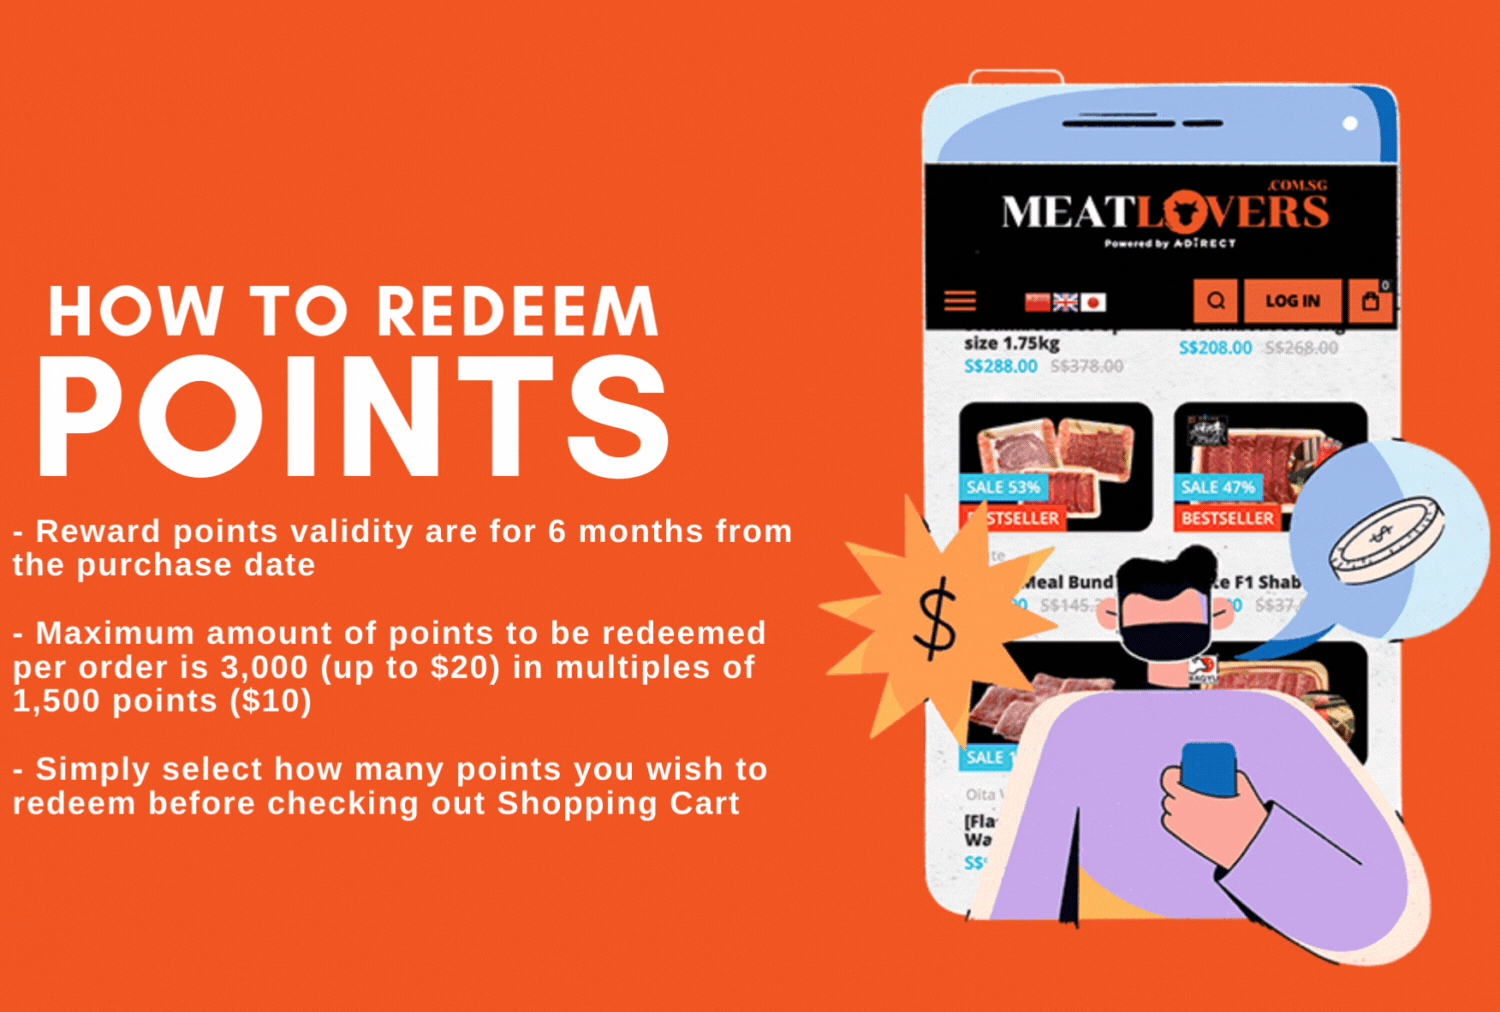 Meatlovers Membership Point Redemption 